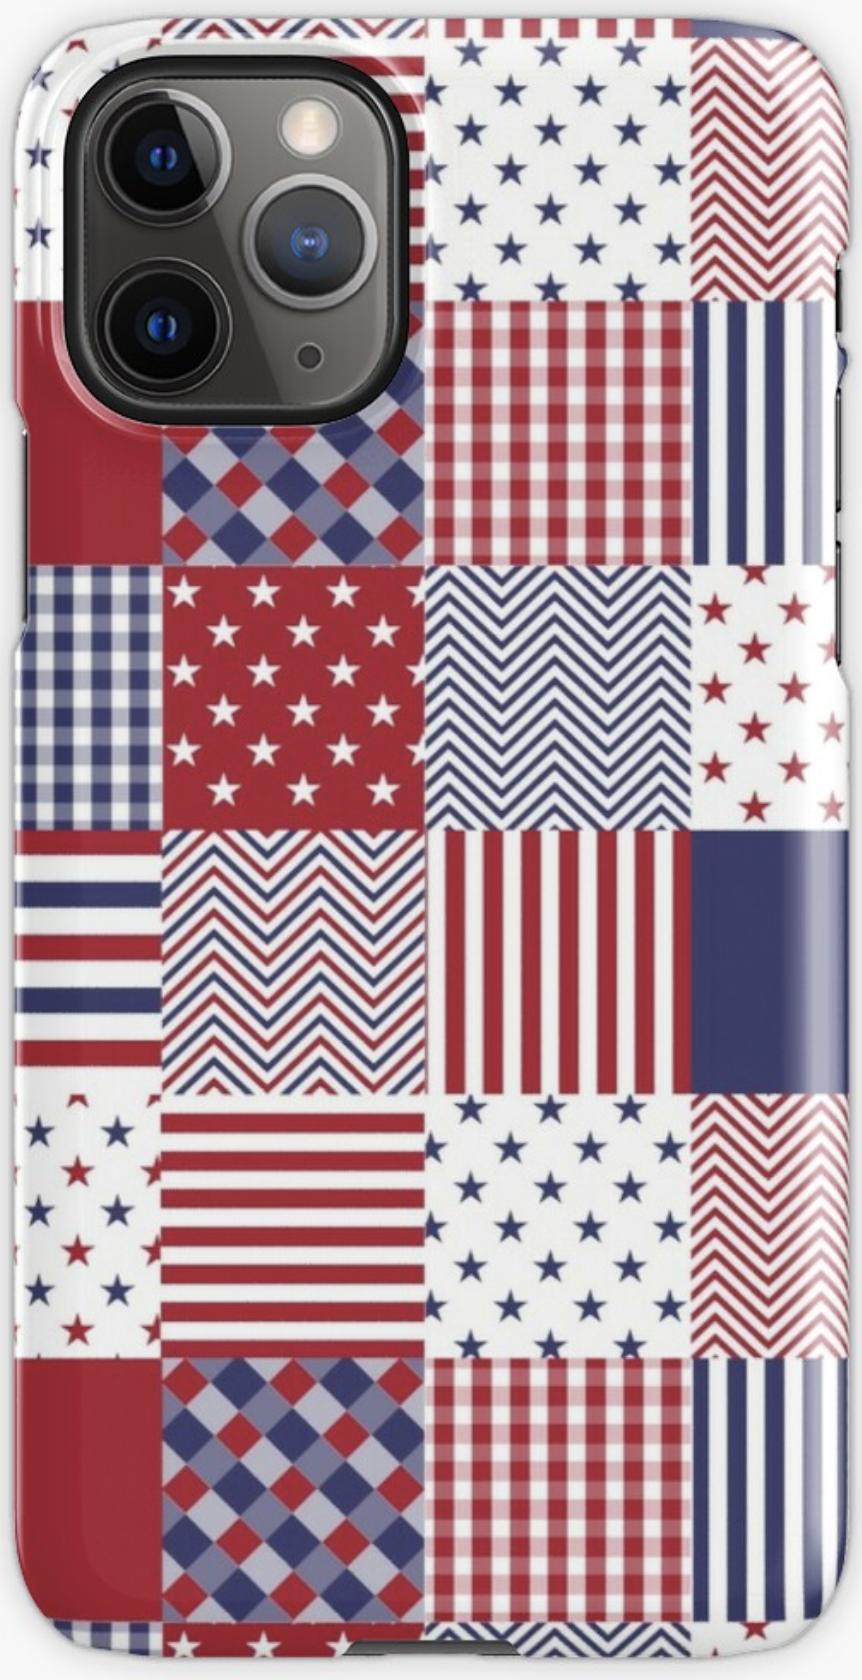 USA American Patchwork iPhone case